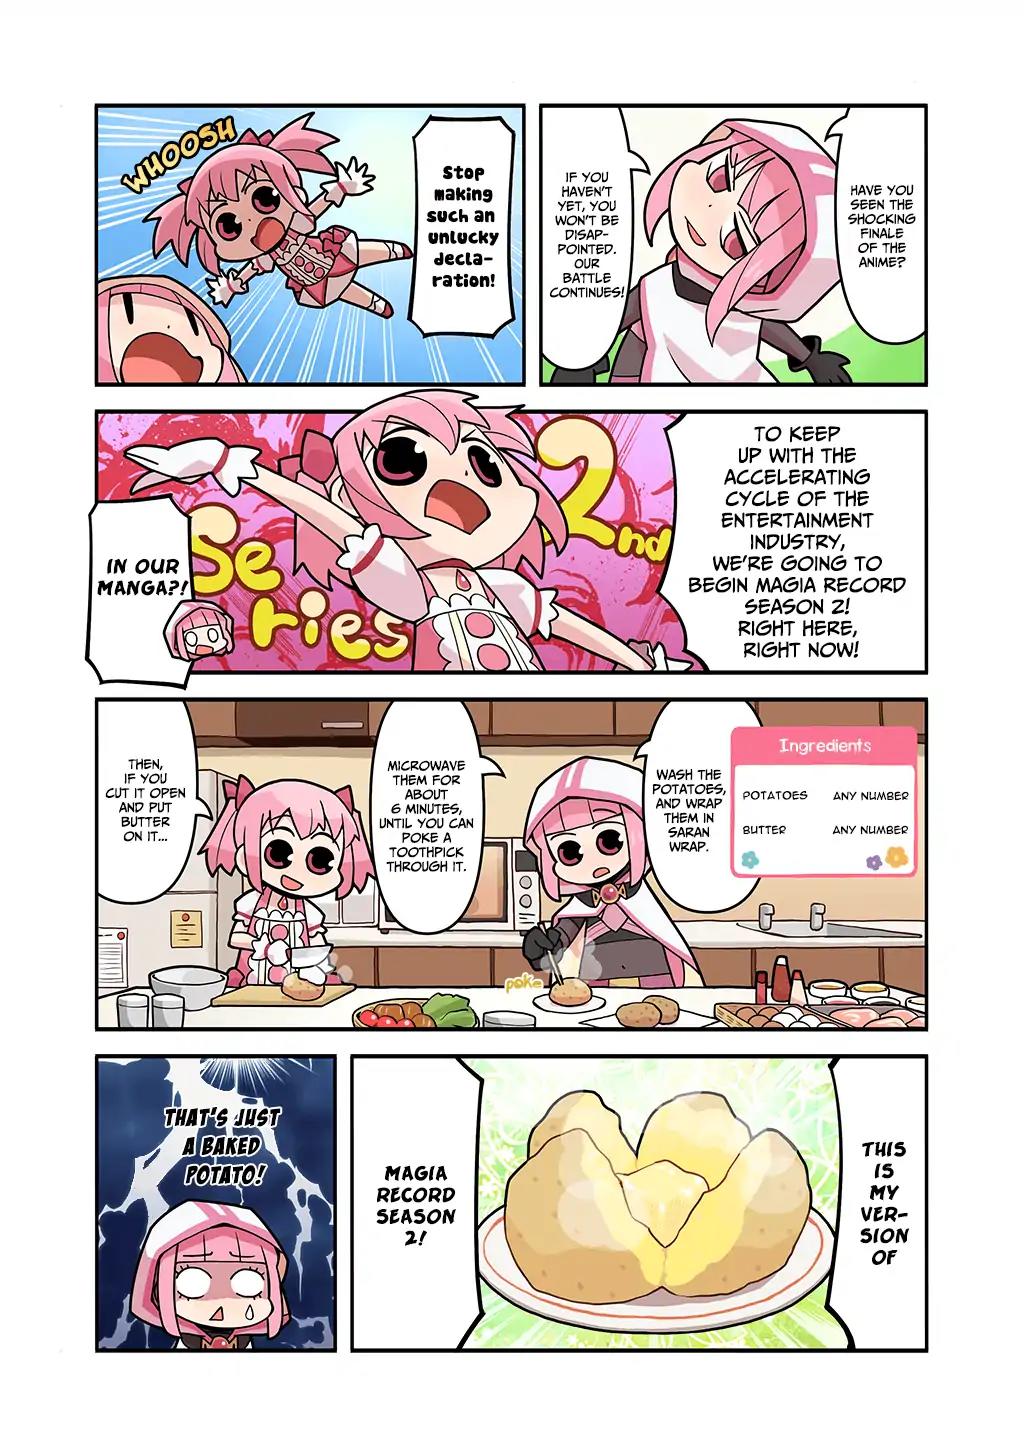 Magia Report Vol.2 Chapter 127